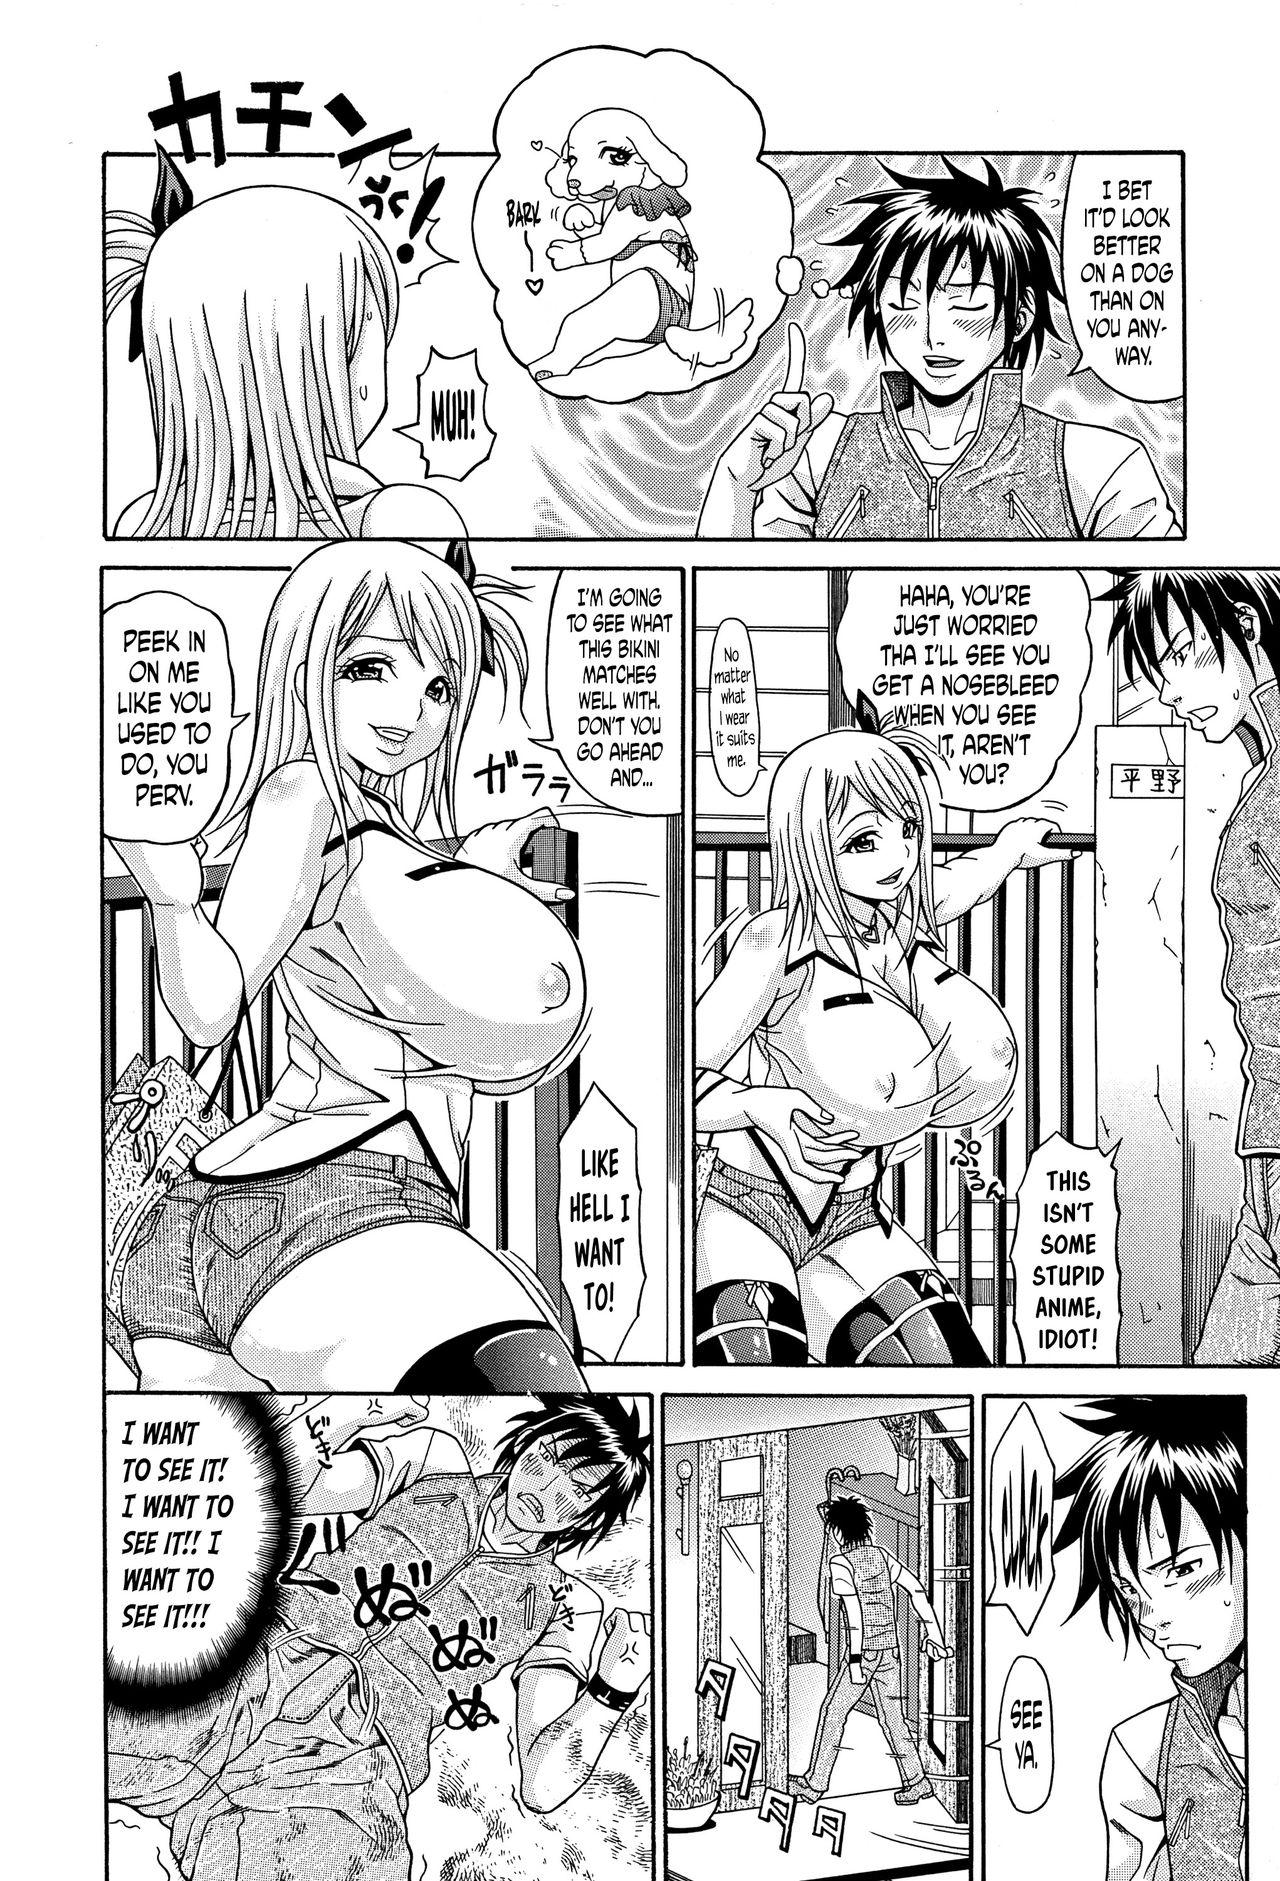 [Andou Hiroyuki] Mamire Chichi - Sticky Tits Feel Hot All Over. Ch.1-5 [English] [doujin-moe.us] 38